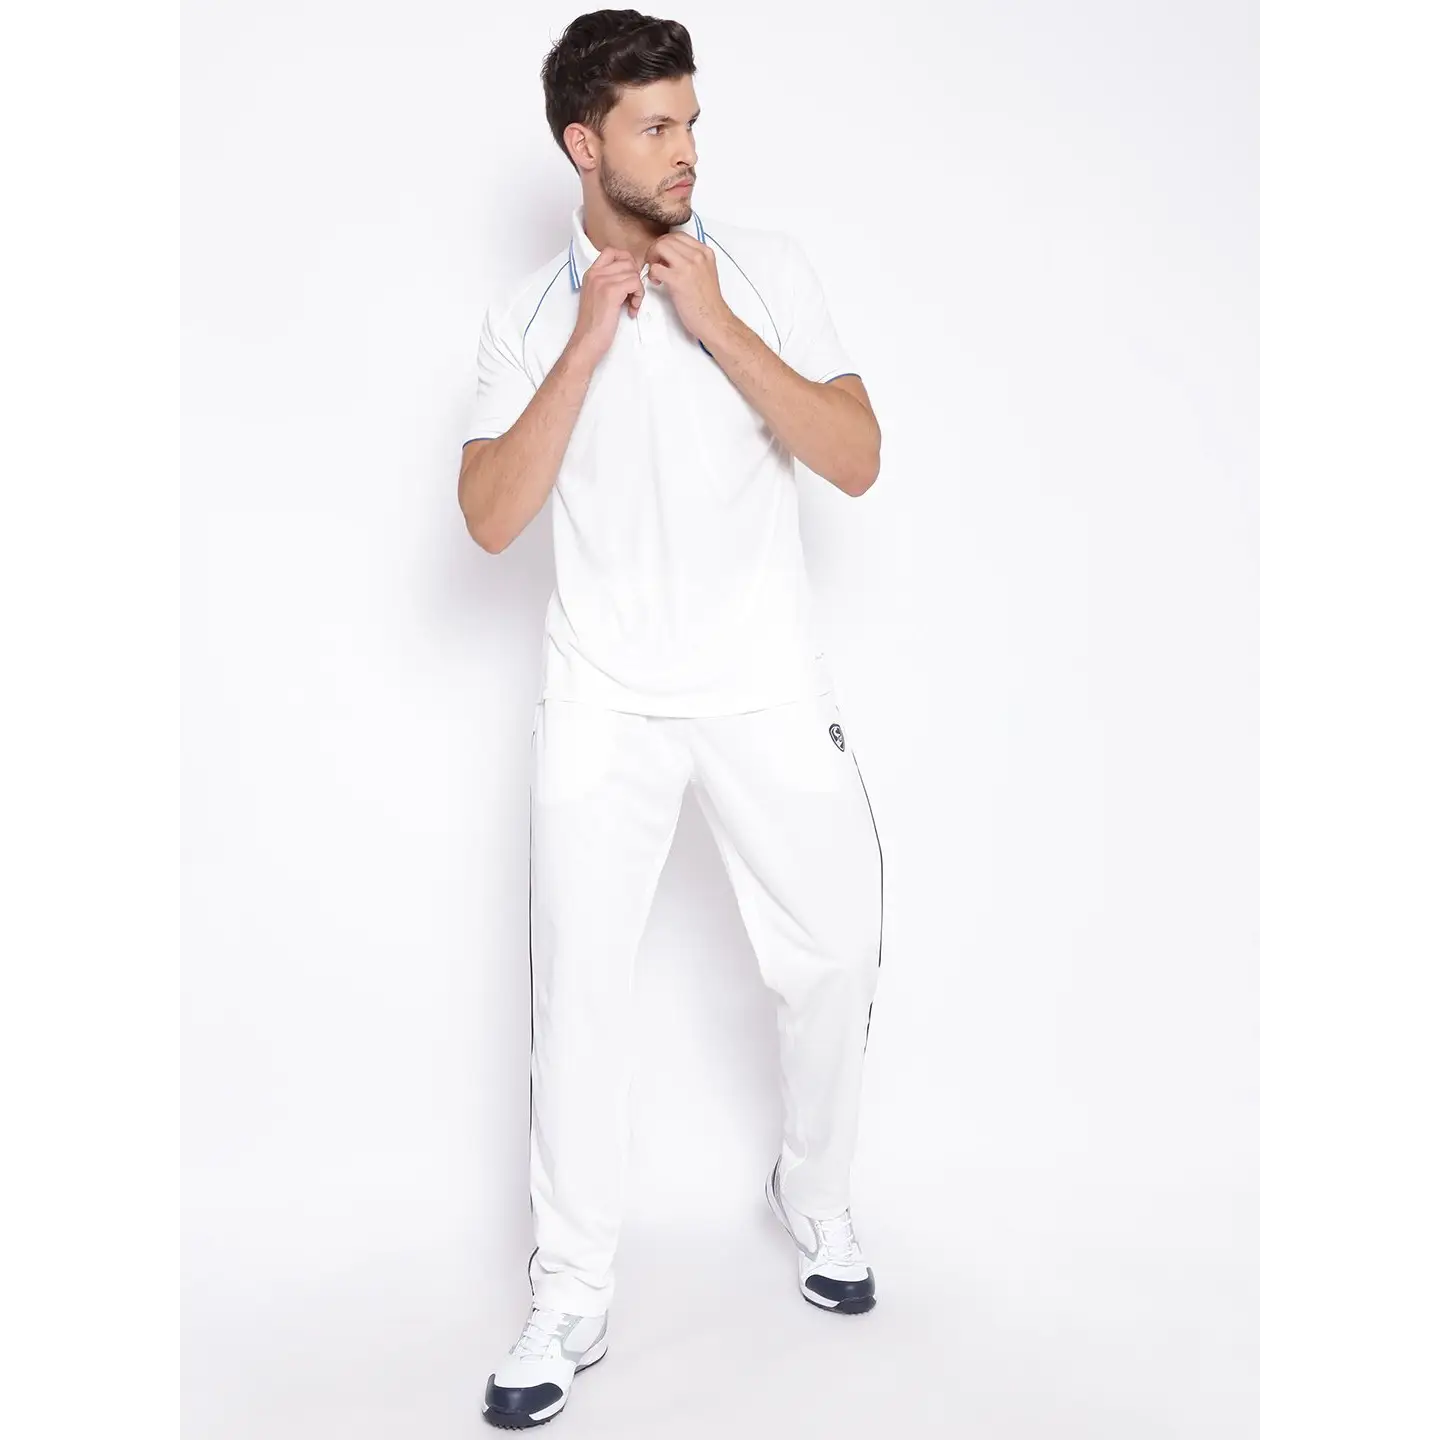 SG Century Cricket Trouser Pant Polyester Drimaxx - CLOTHING - PANTS